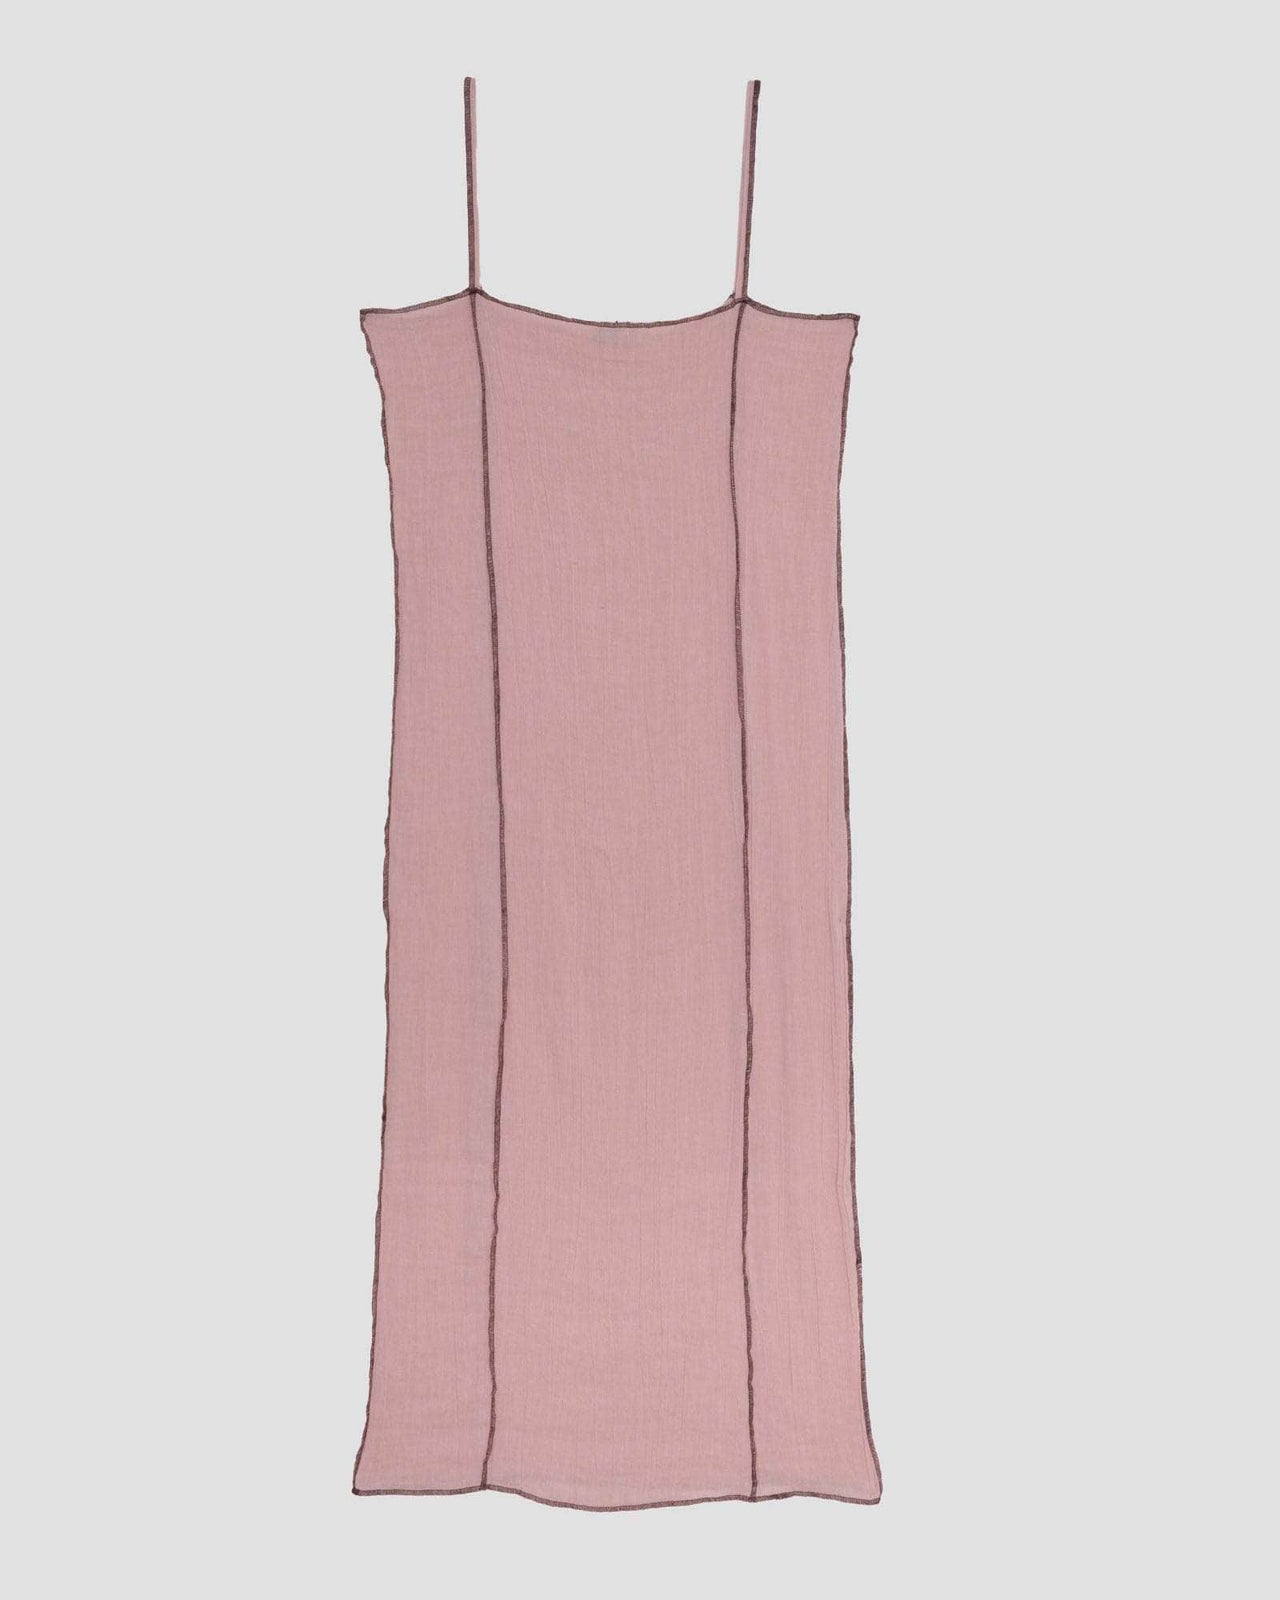 Barely There Seamless Slip Dress – Thank you